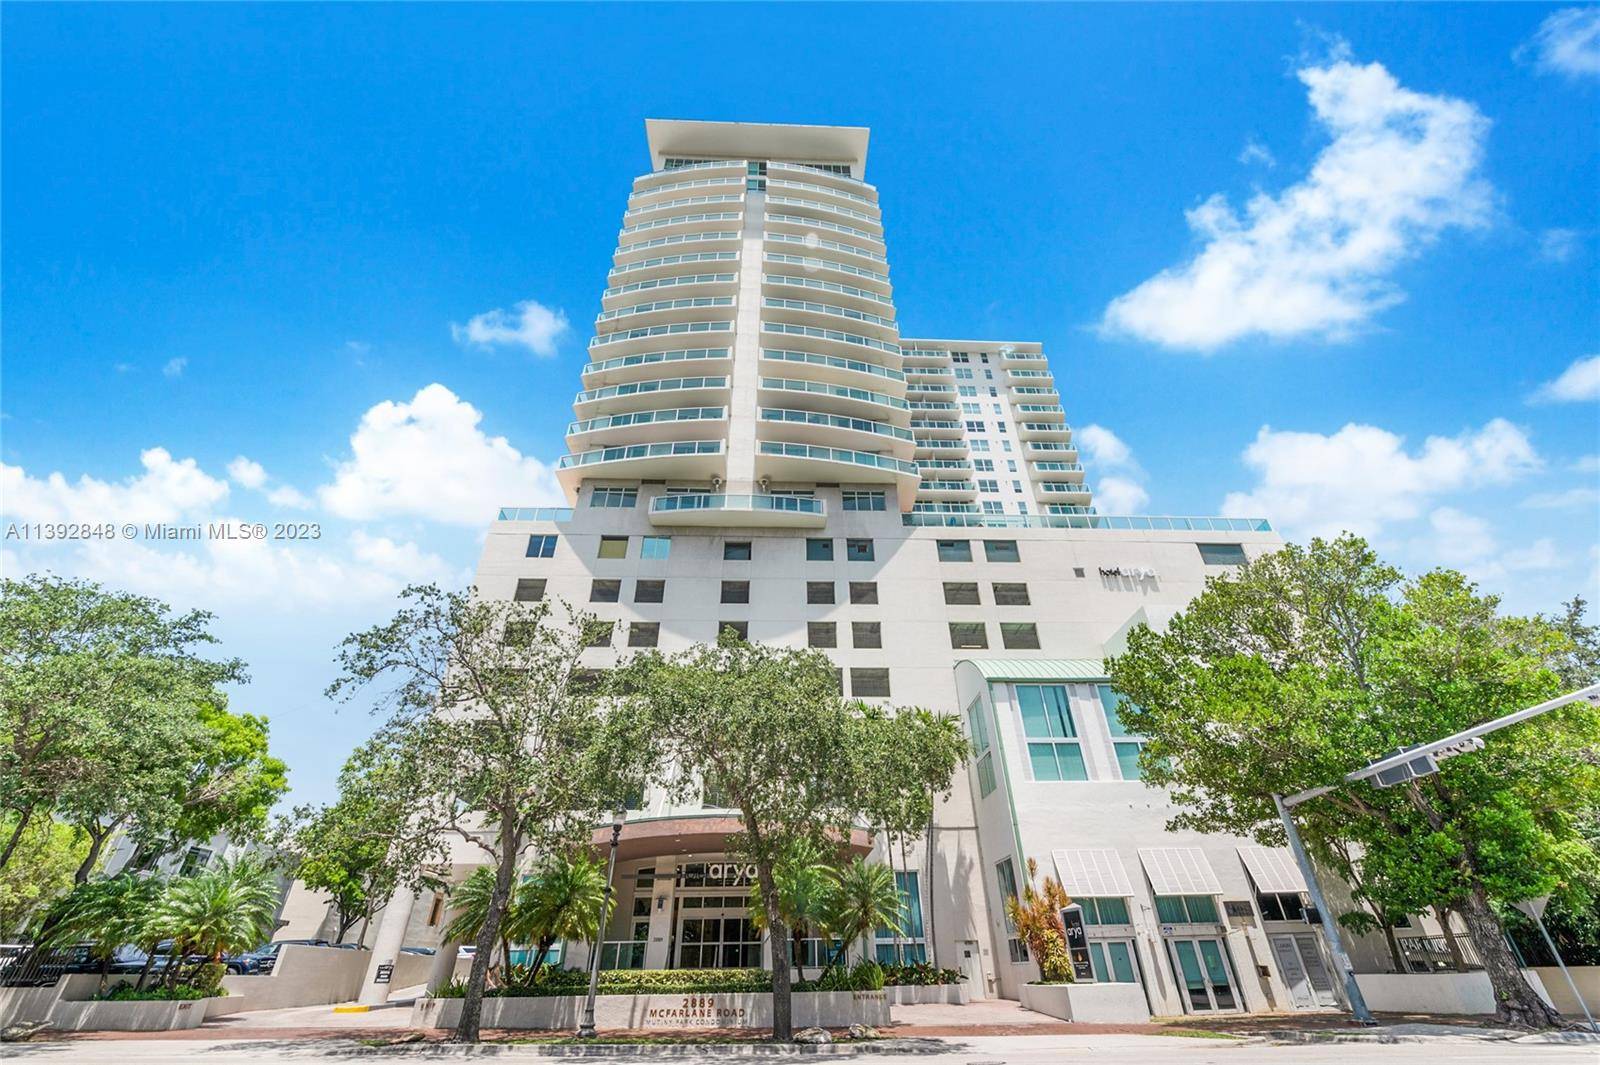 MOVE RIGHT IN TO THIS FULLY FURNISHED CONDO LOCATED ON THE 18TH FLOOR OF THIS UPSCALE CONDO HOTEL.